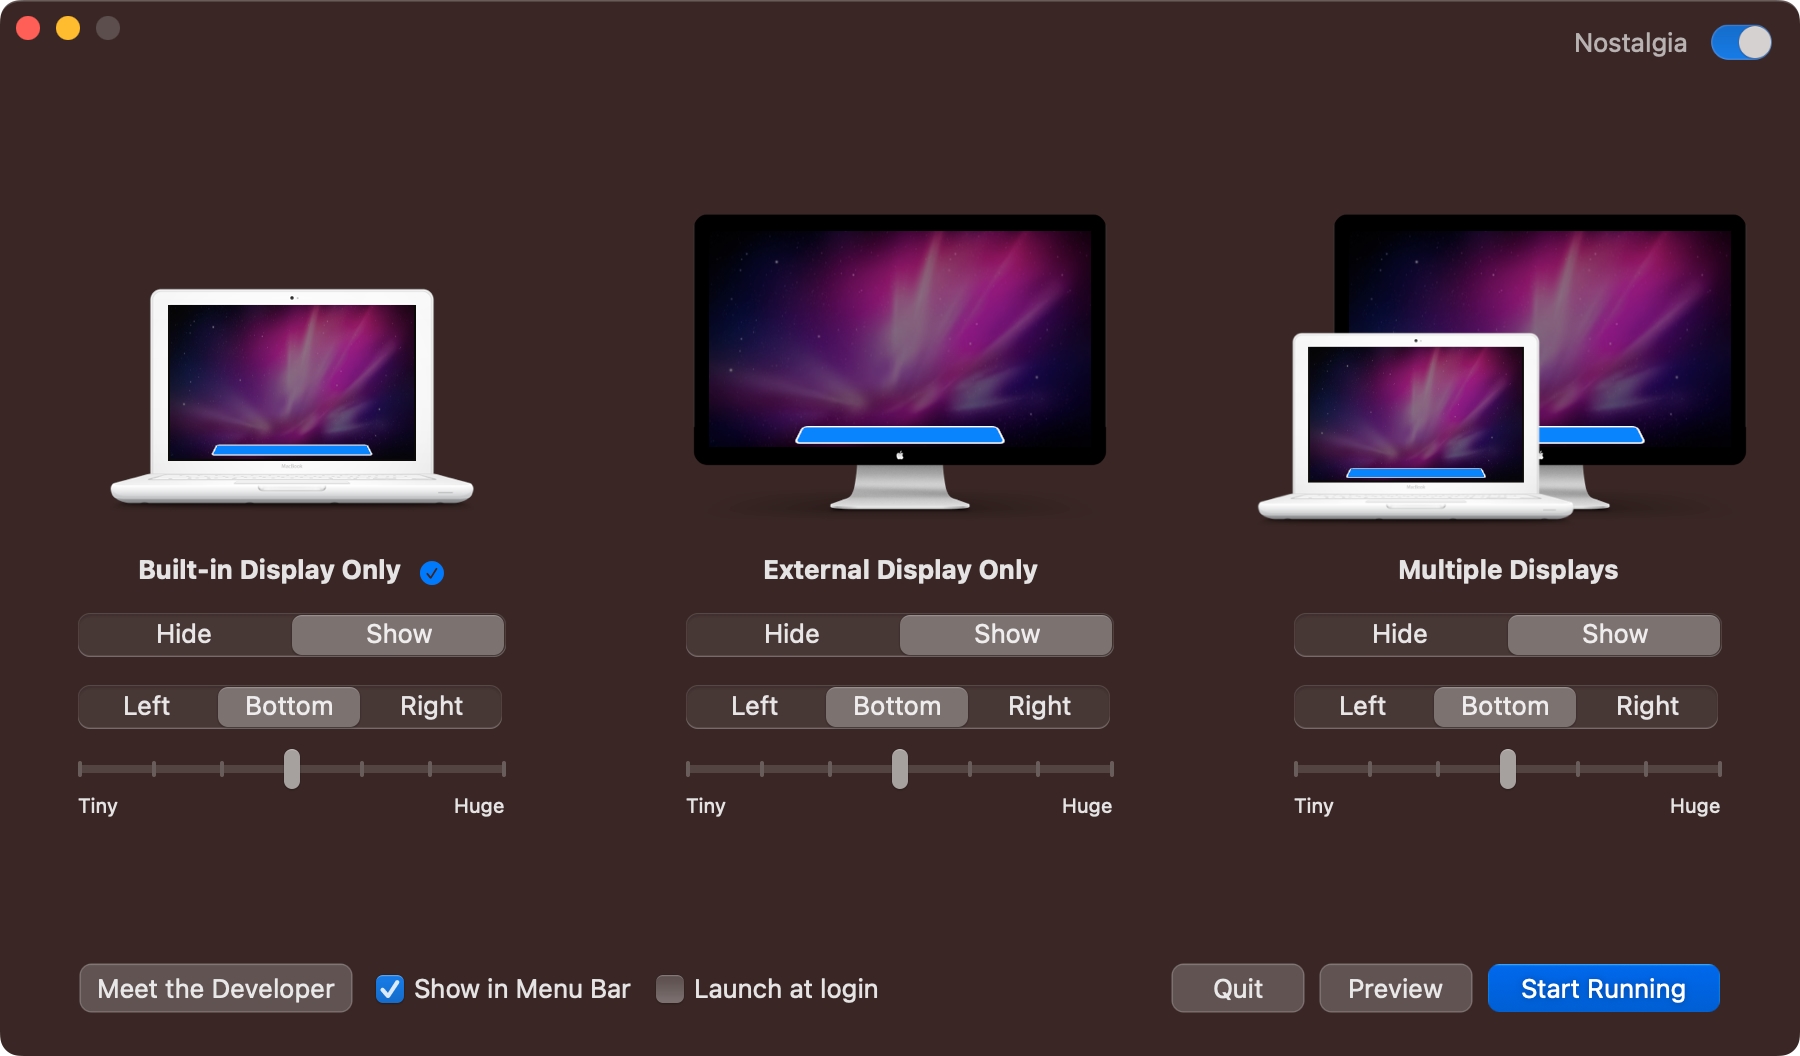 Current Macs in the HiDock app replaced with older models